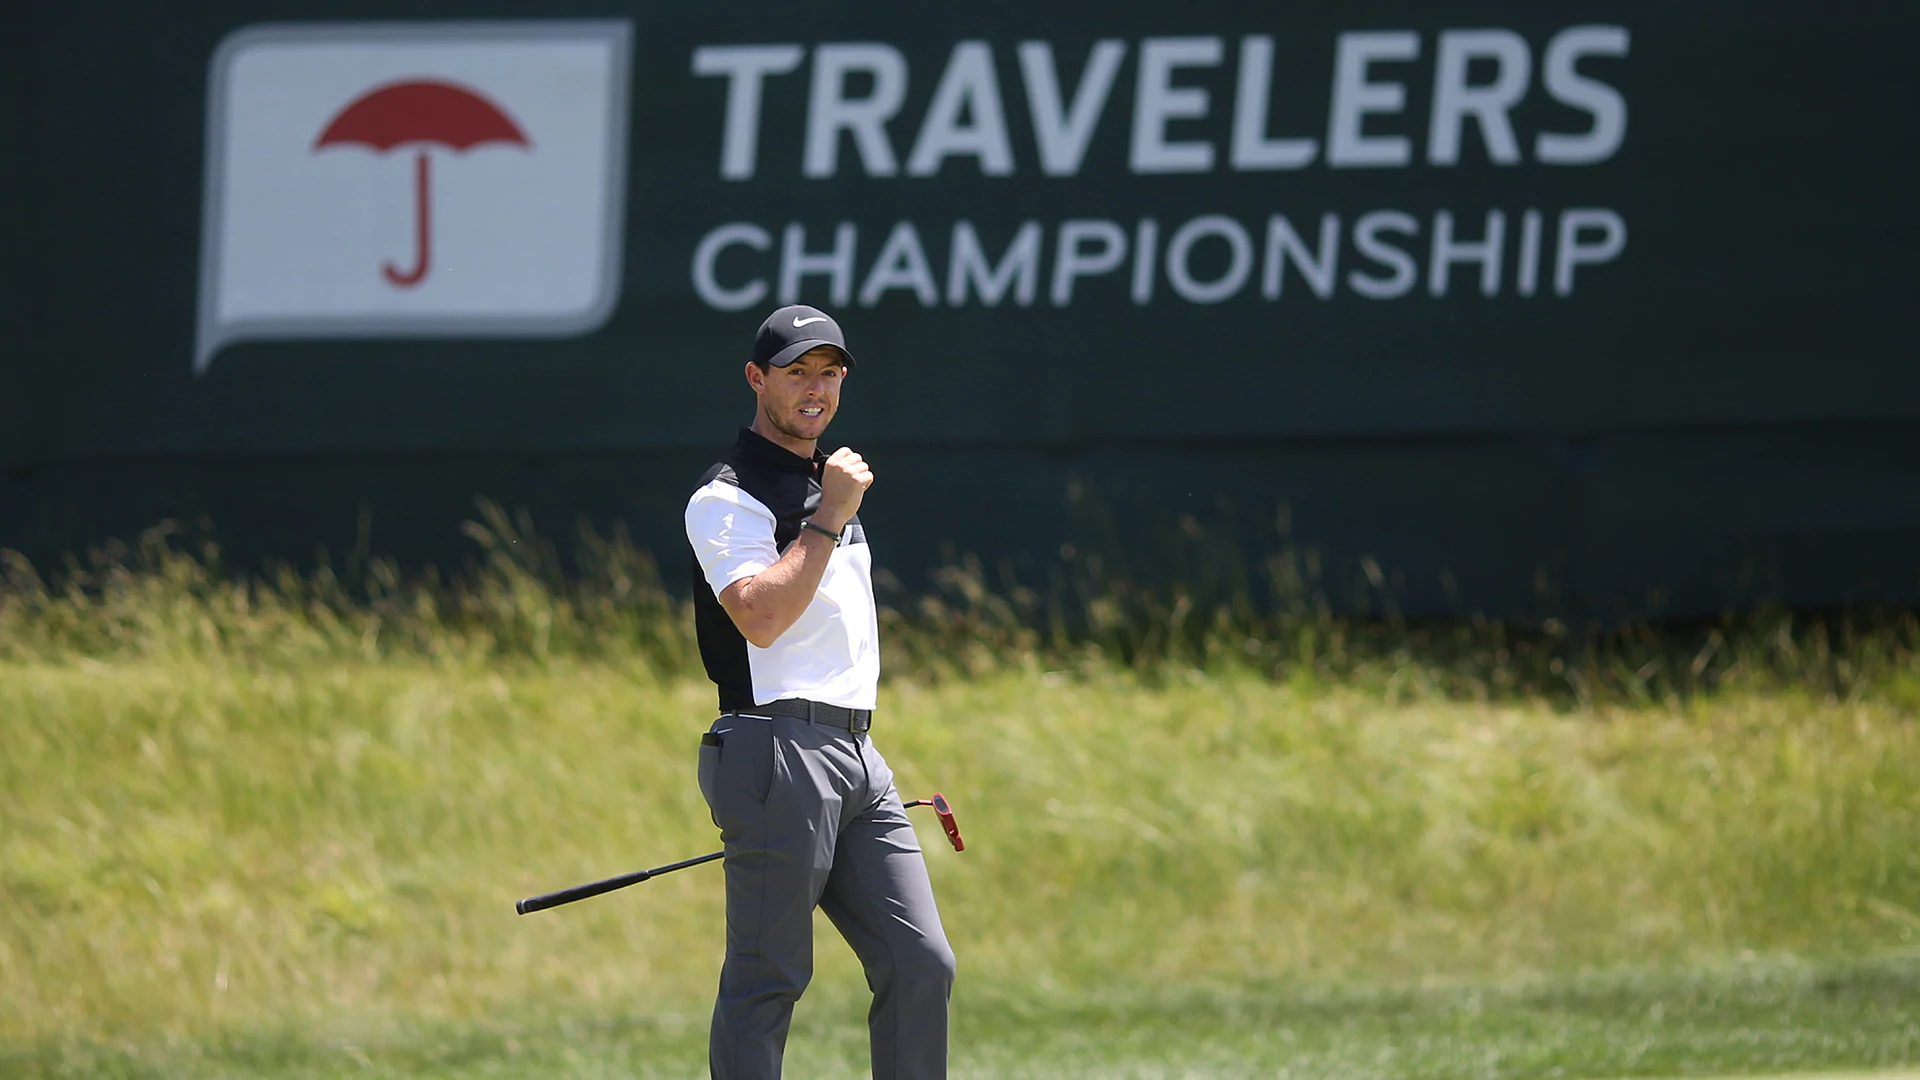 As promised, McIlroy returning to Travelers